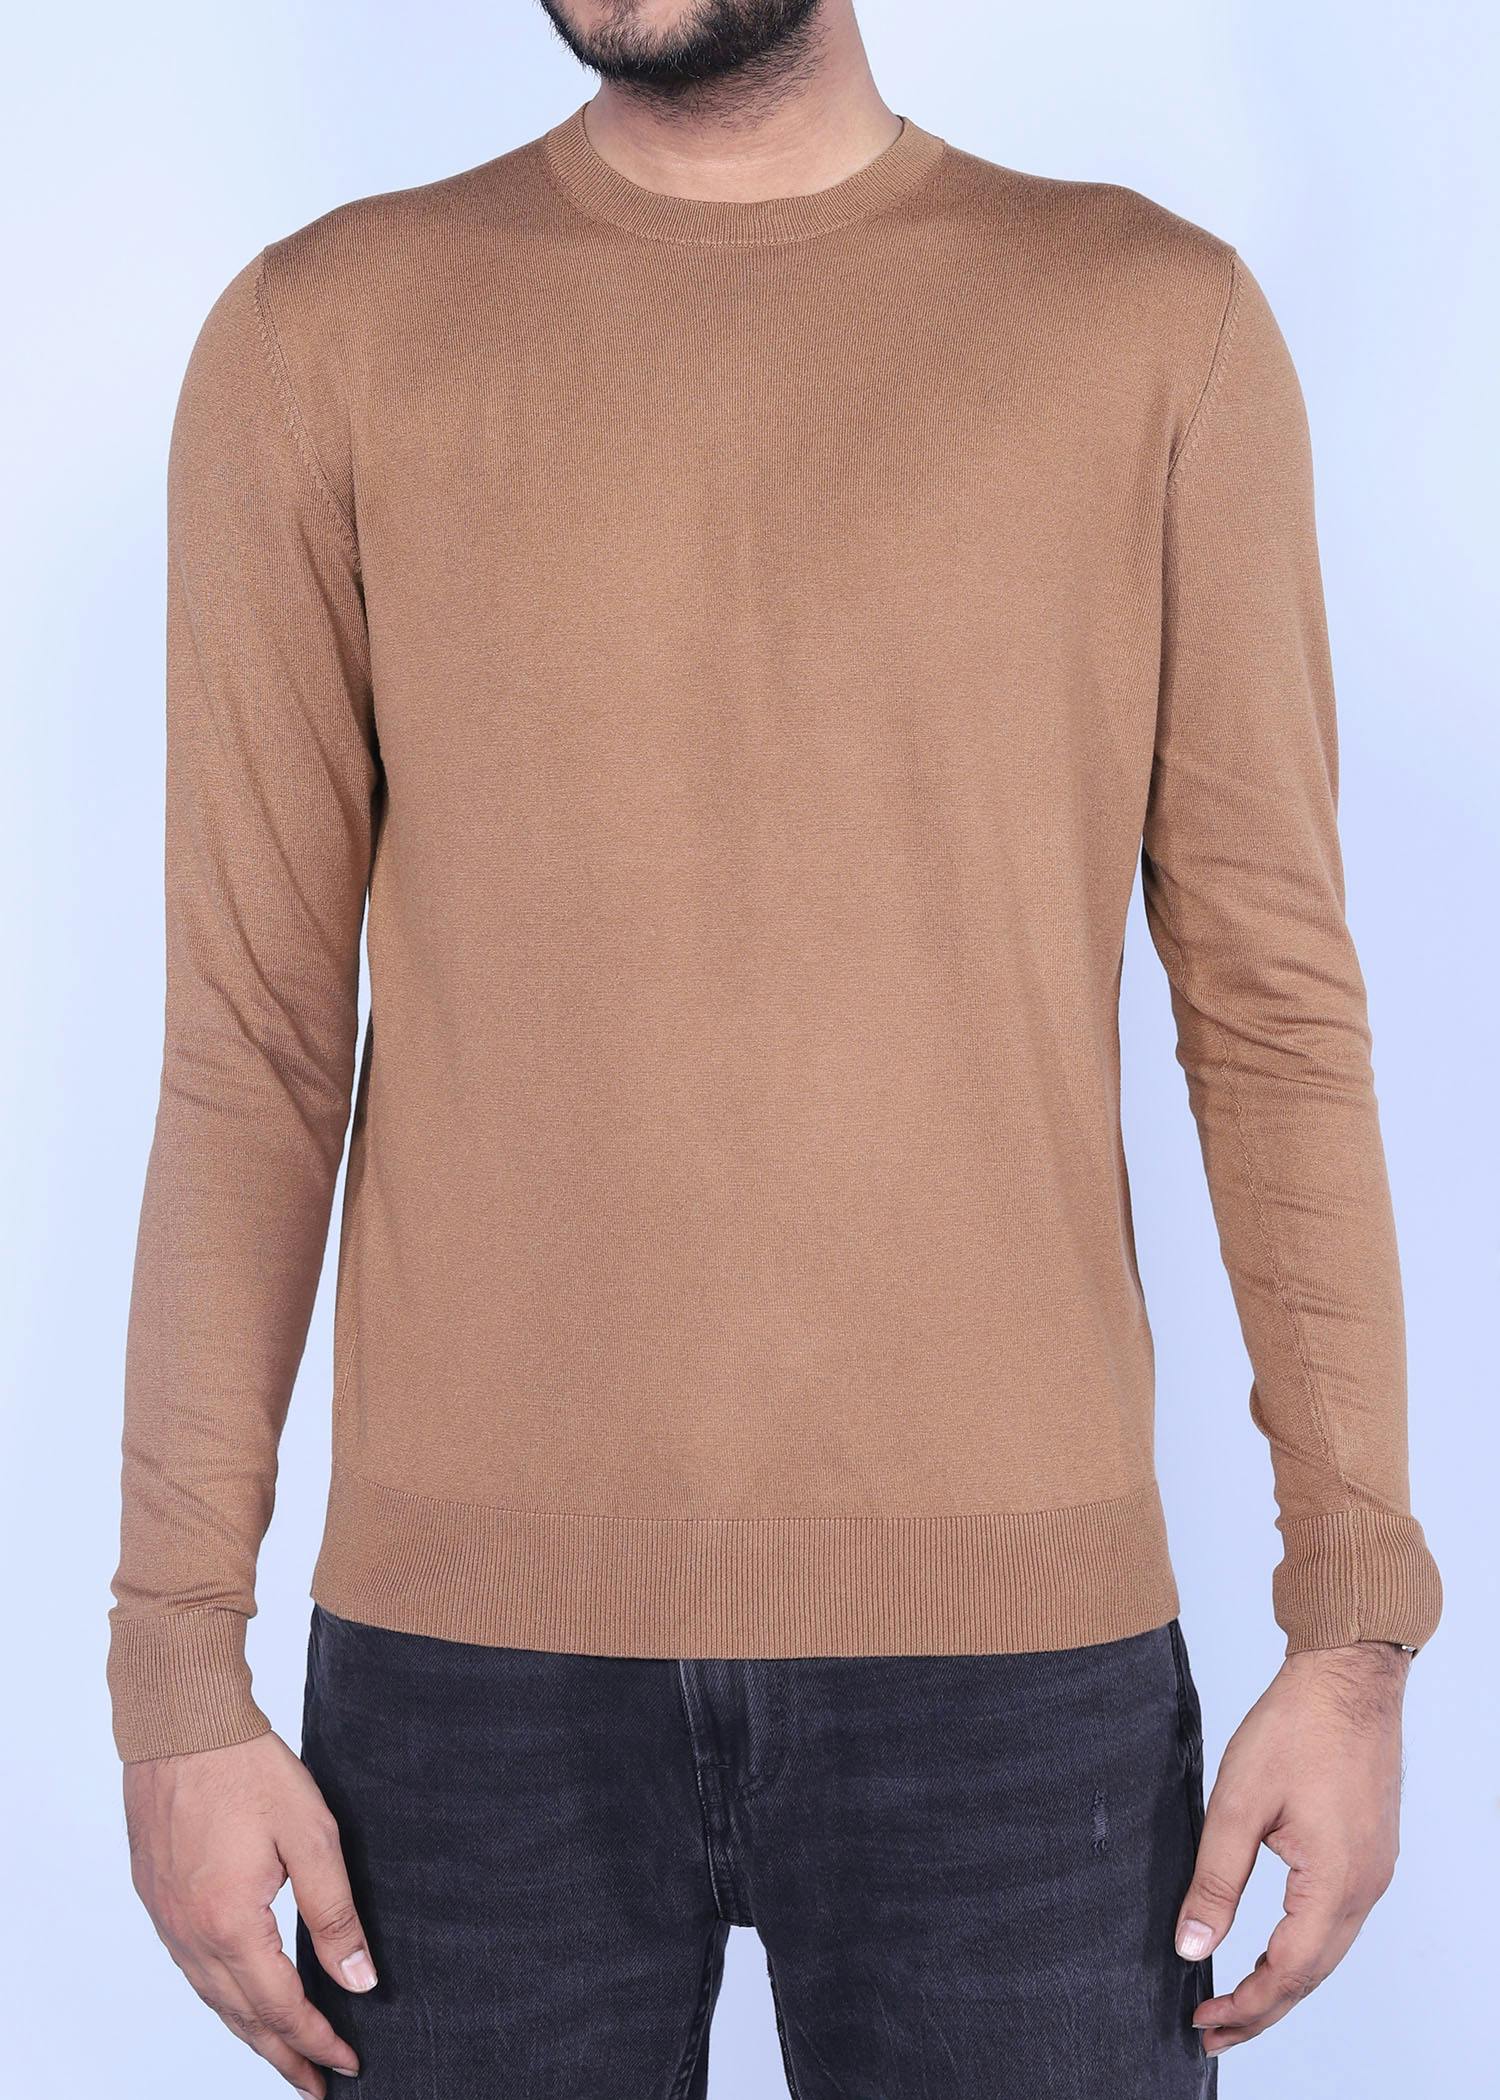 rock pigeon sweater tobaco color half front view